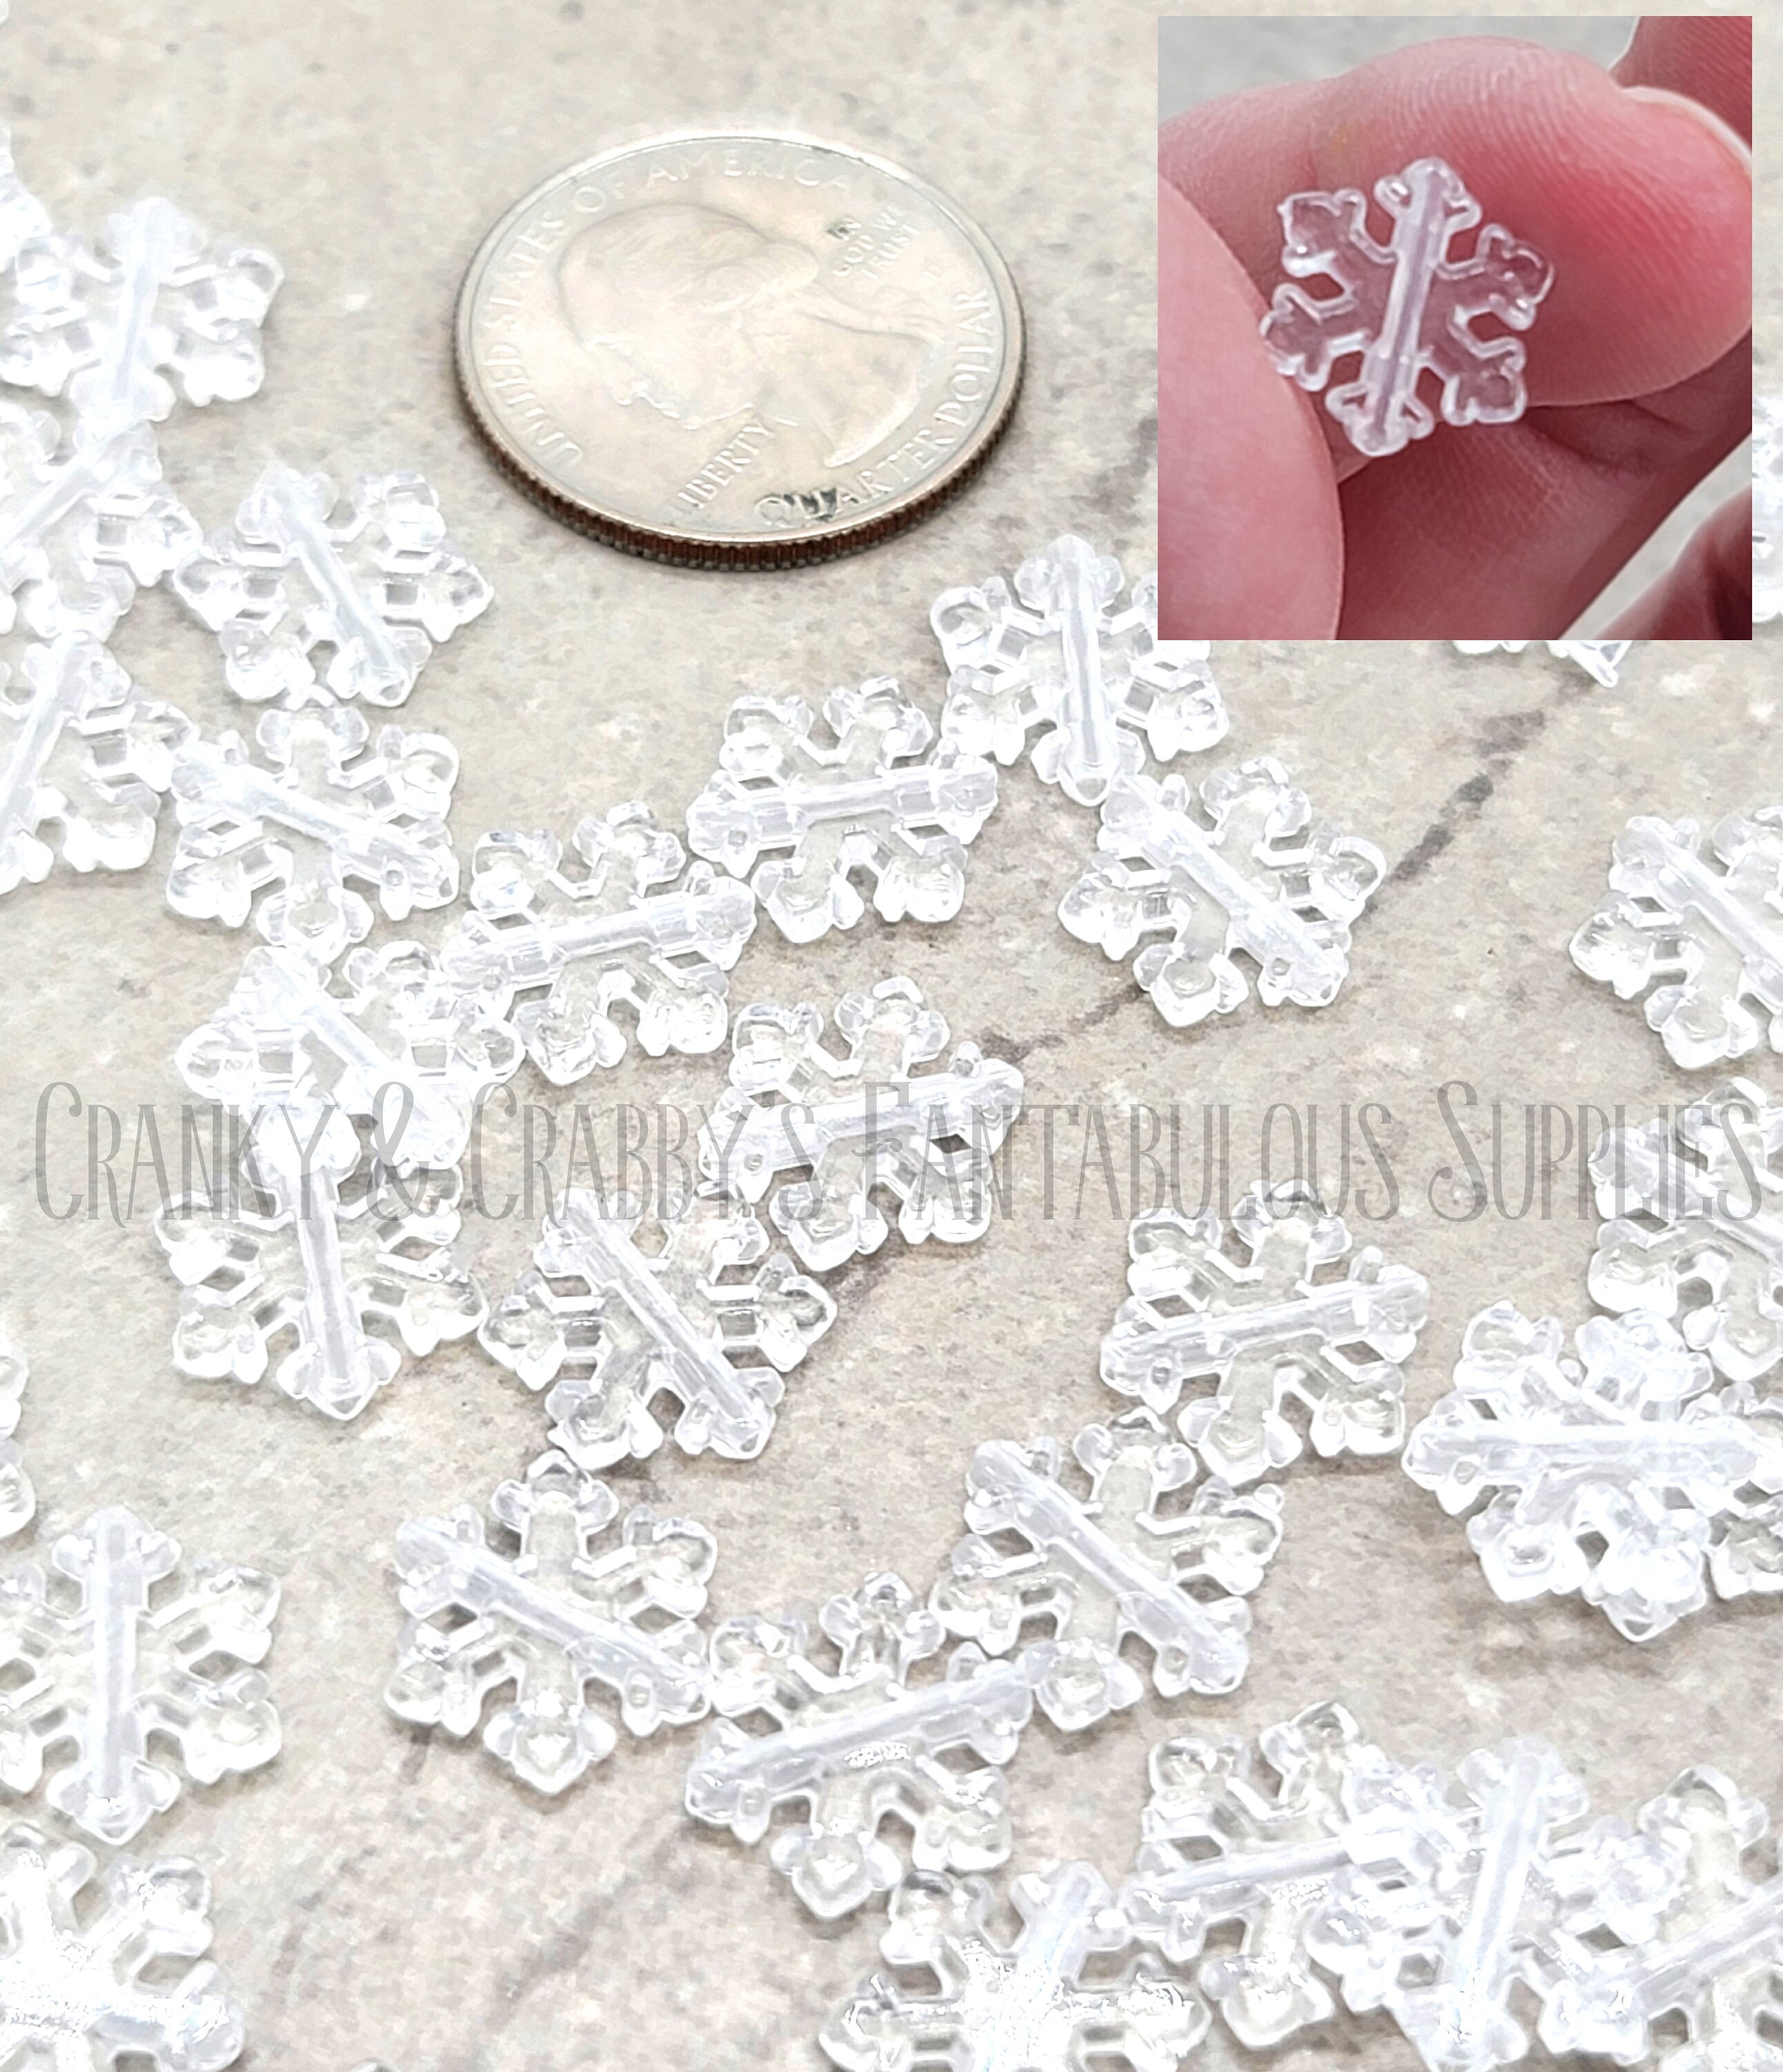 Willbond 50 Pieces Mini Snowflake For Craft Tiny Resin Snowflakes Small  Christmas Embellishment Snow Shaped Craft Decoration With Storage